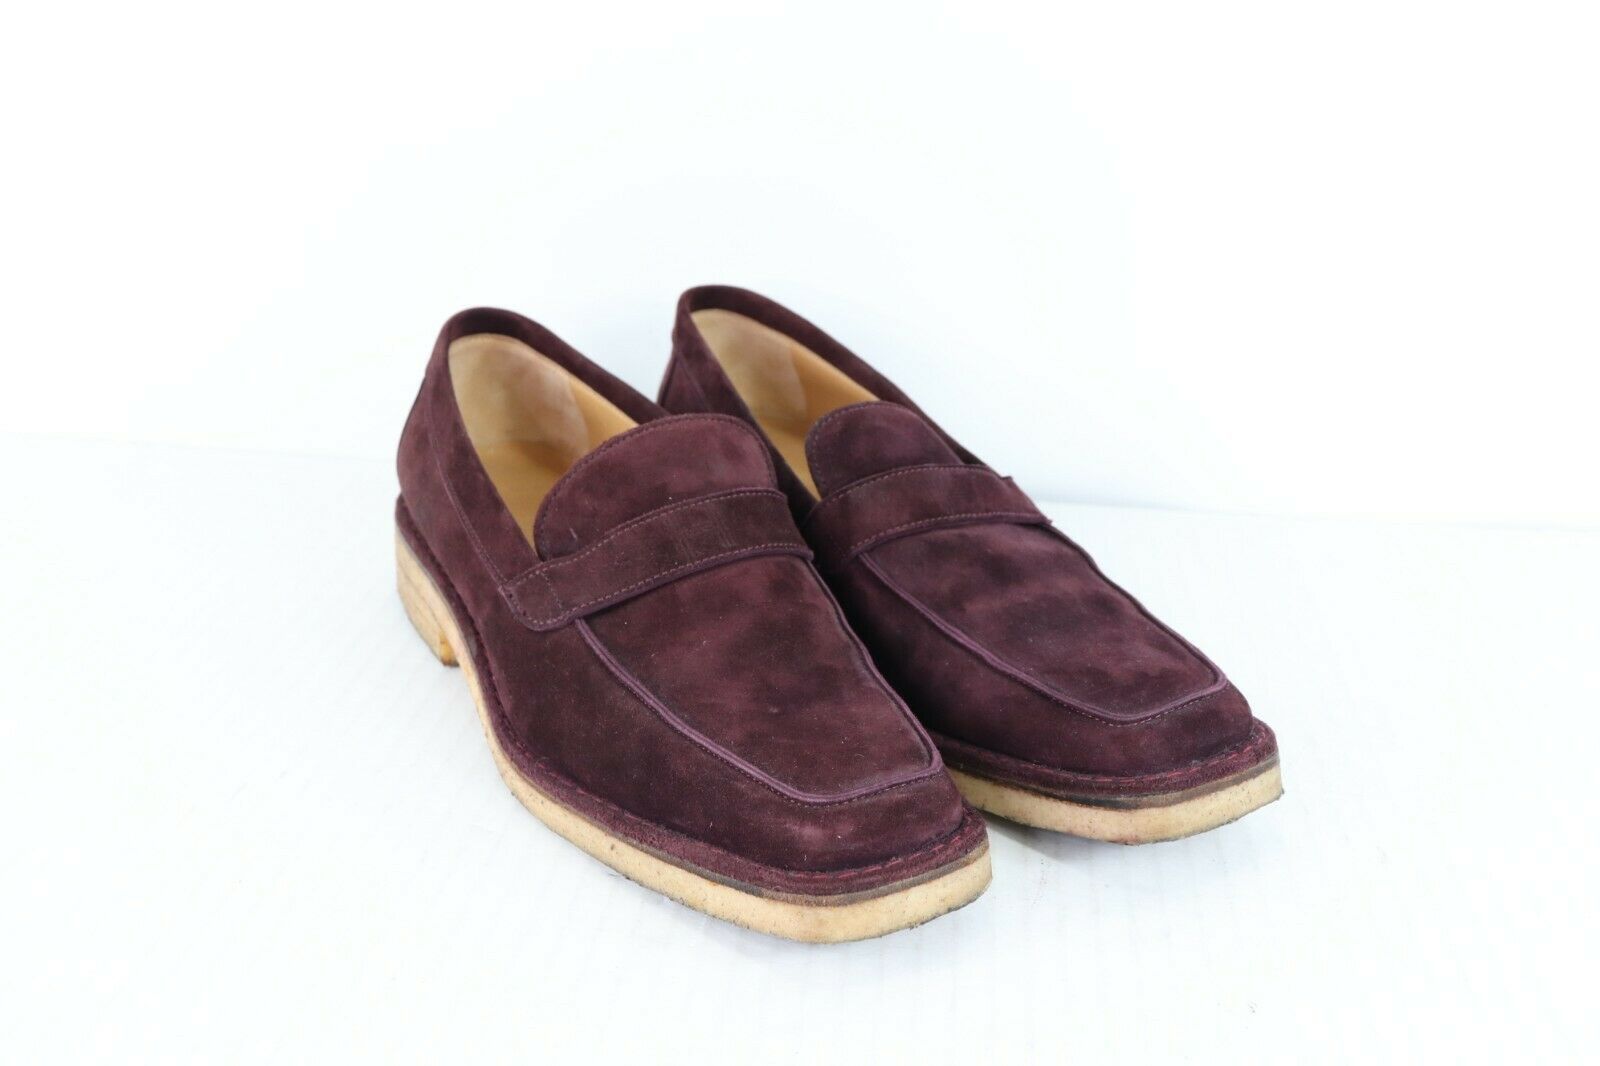 Hermes Paris Womens US 7.5 Veal Leather Suede Loafers Crepe Soles Wine ...